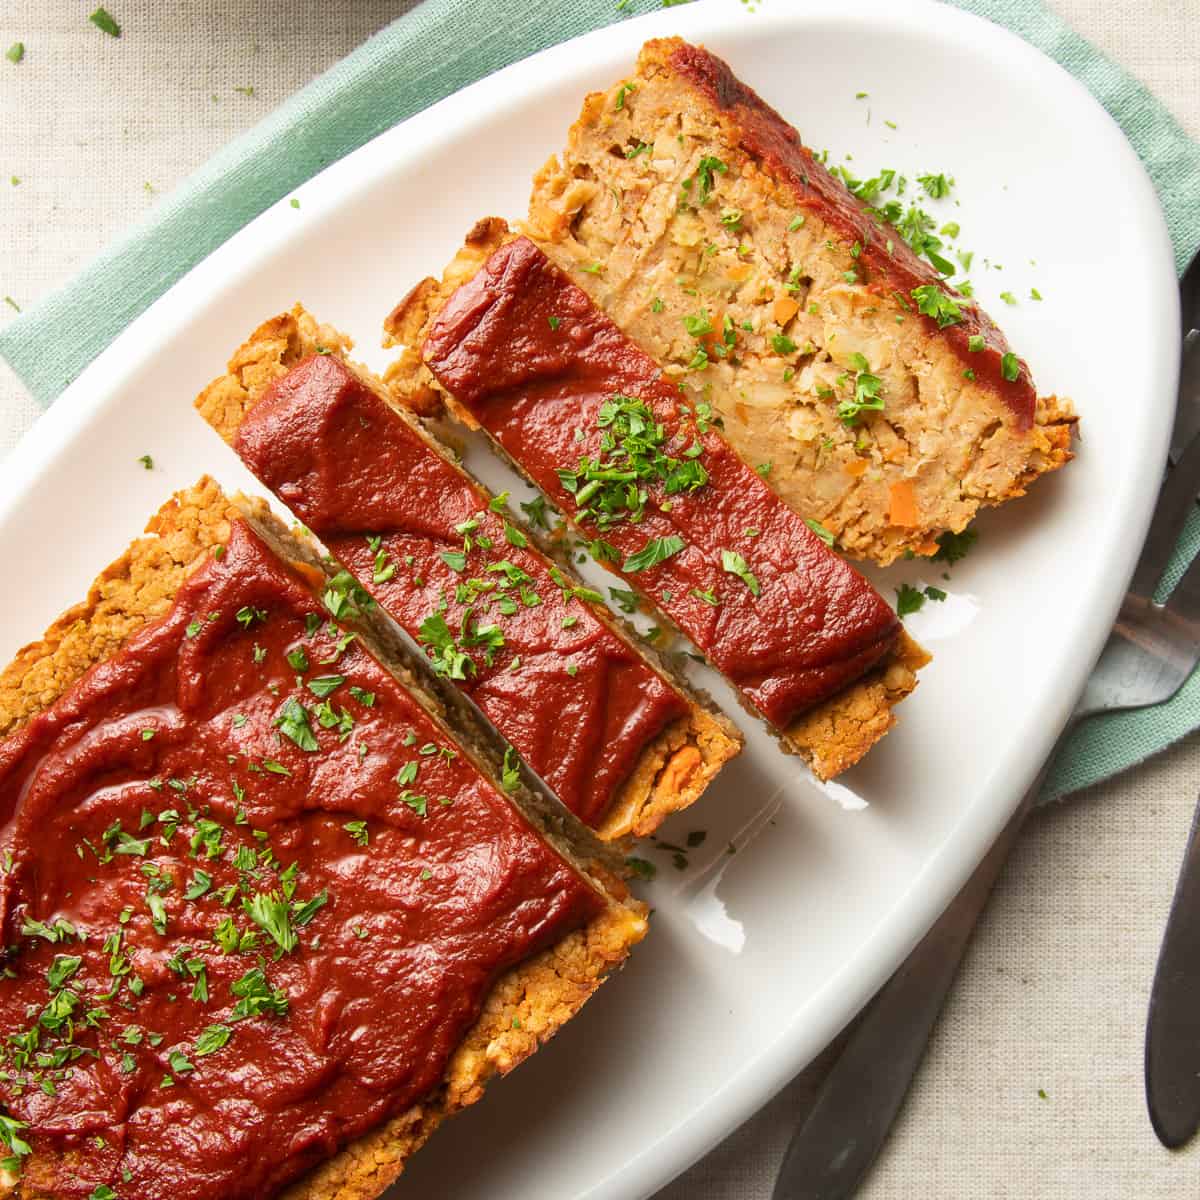 Partially sliced Vegan Meatloaf on an oval serving dish.